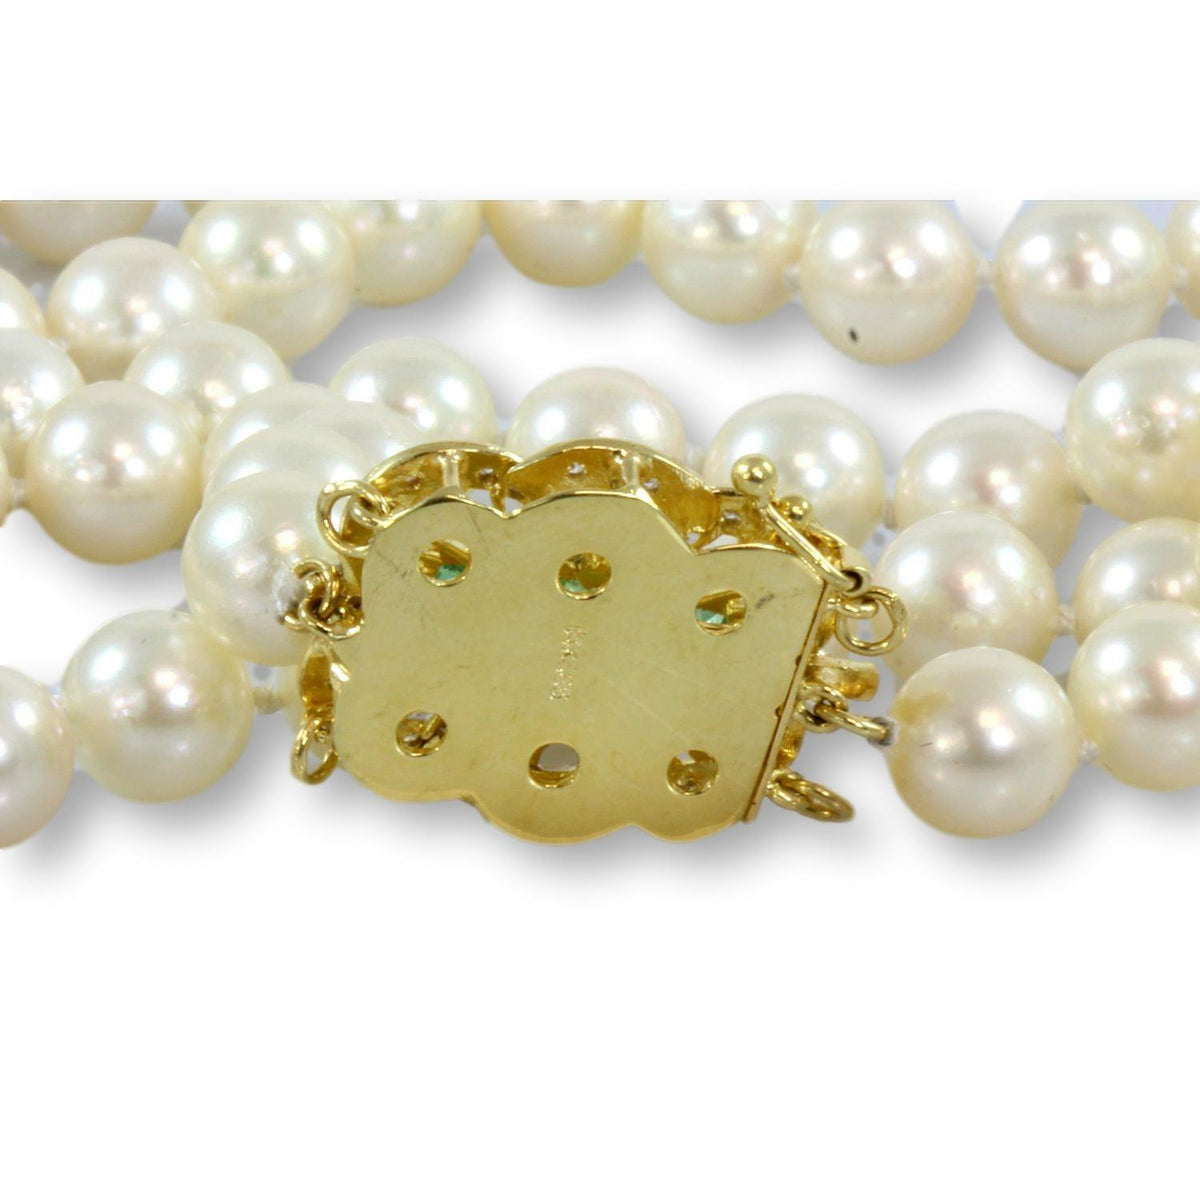 A Strand Of 8 MM Cultured Pearls With Diamond Clasp